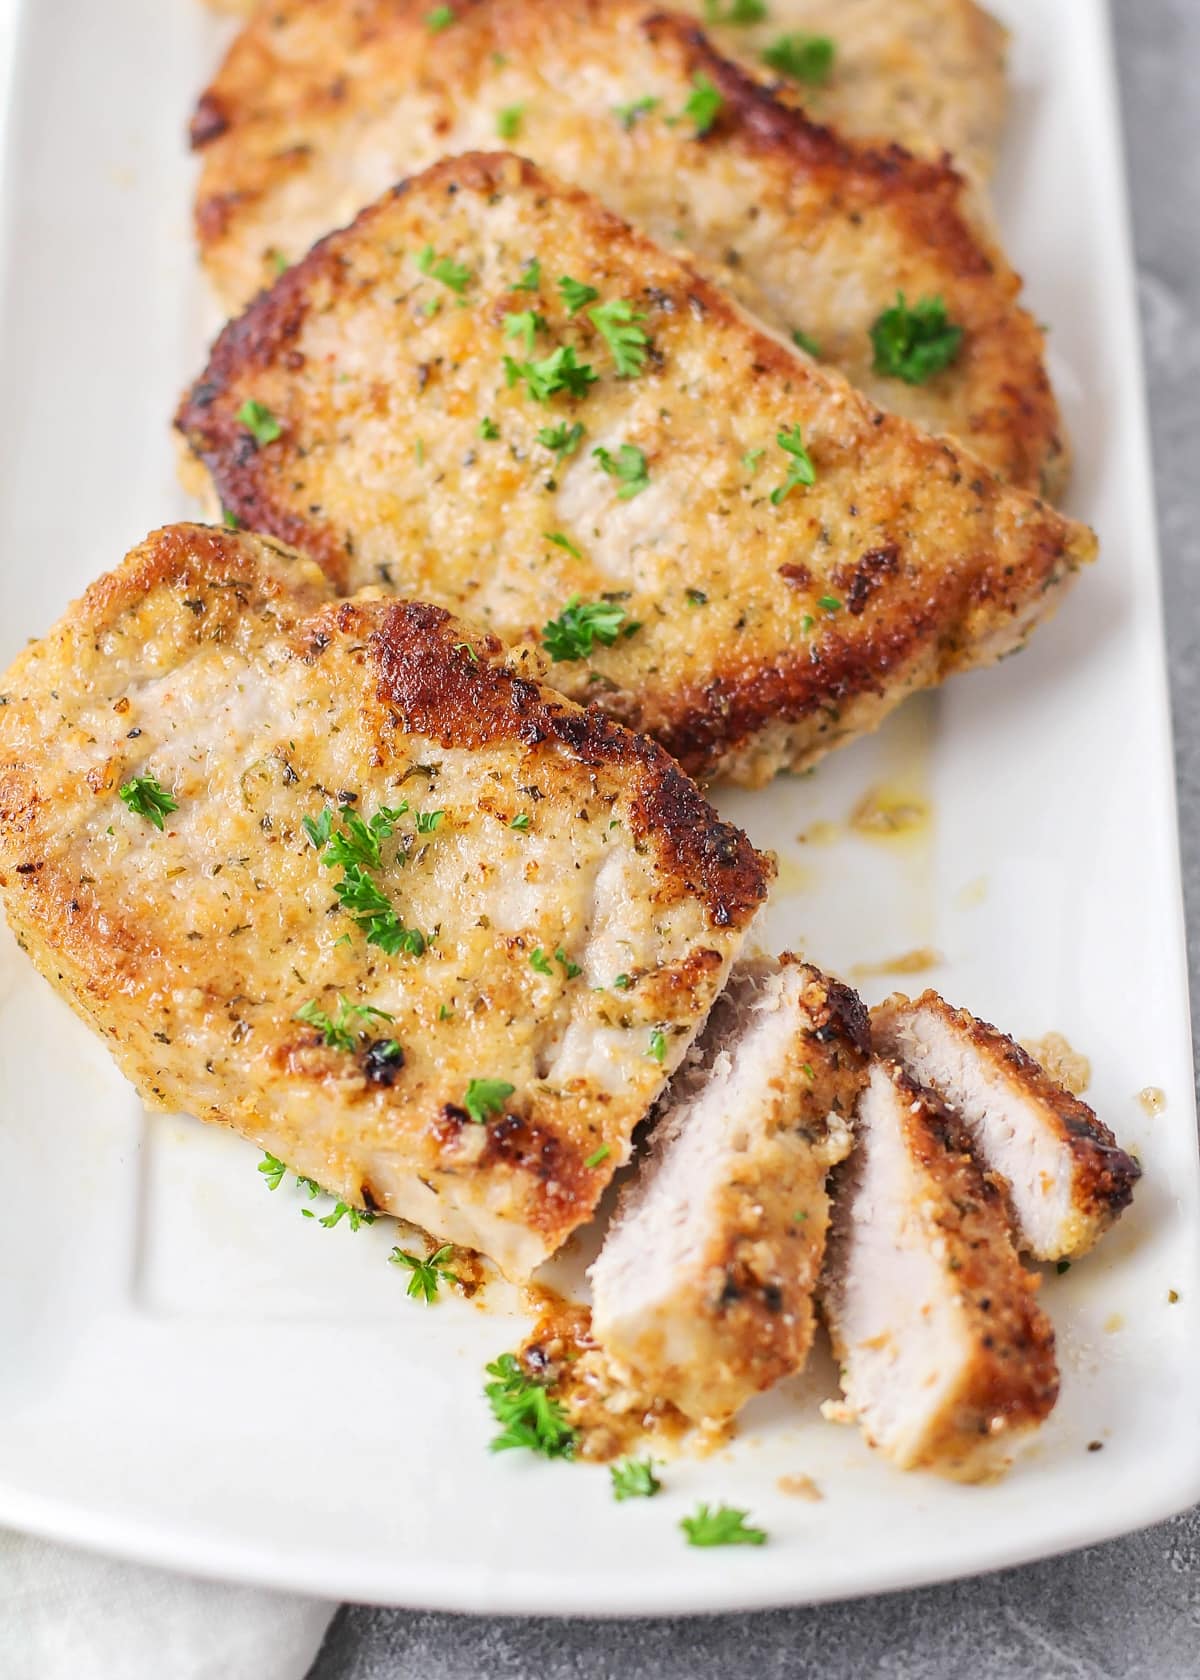 Sliced easy parmesan crusted pork chops ready for serving.